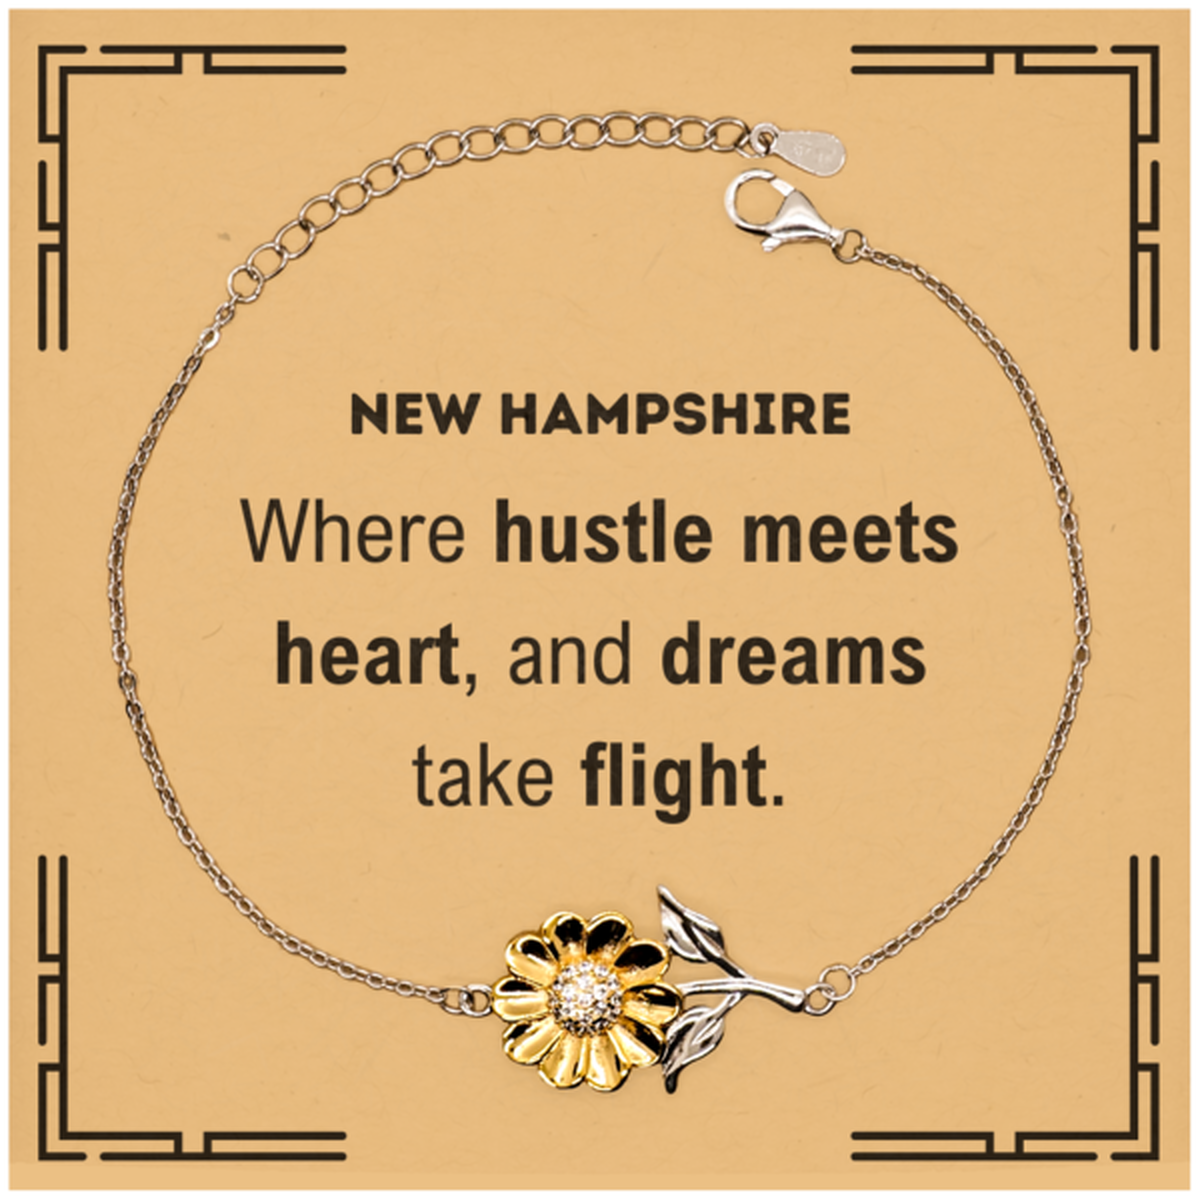 New Hampshire: Where hustle meets heart, and dreams take flight, New Hampshire Card Gifts, Proud New Hampshire Christmas Birthday New Hampshire Sunflower Bracelet, New Hampshire State People, Men, Women, Friends